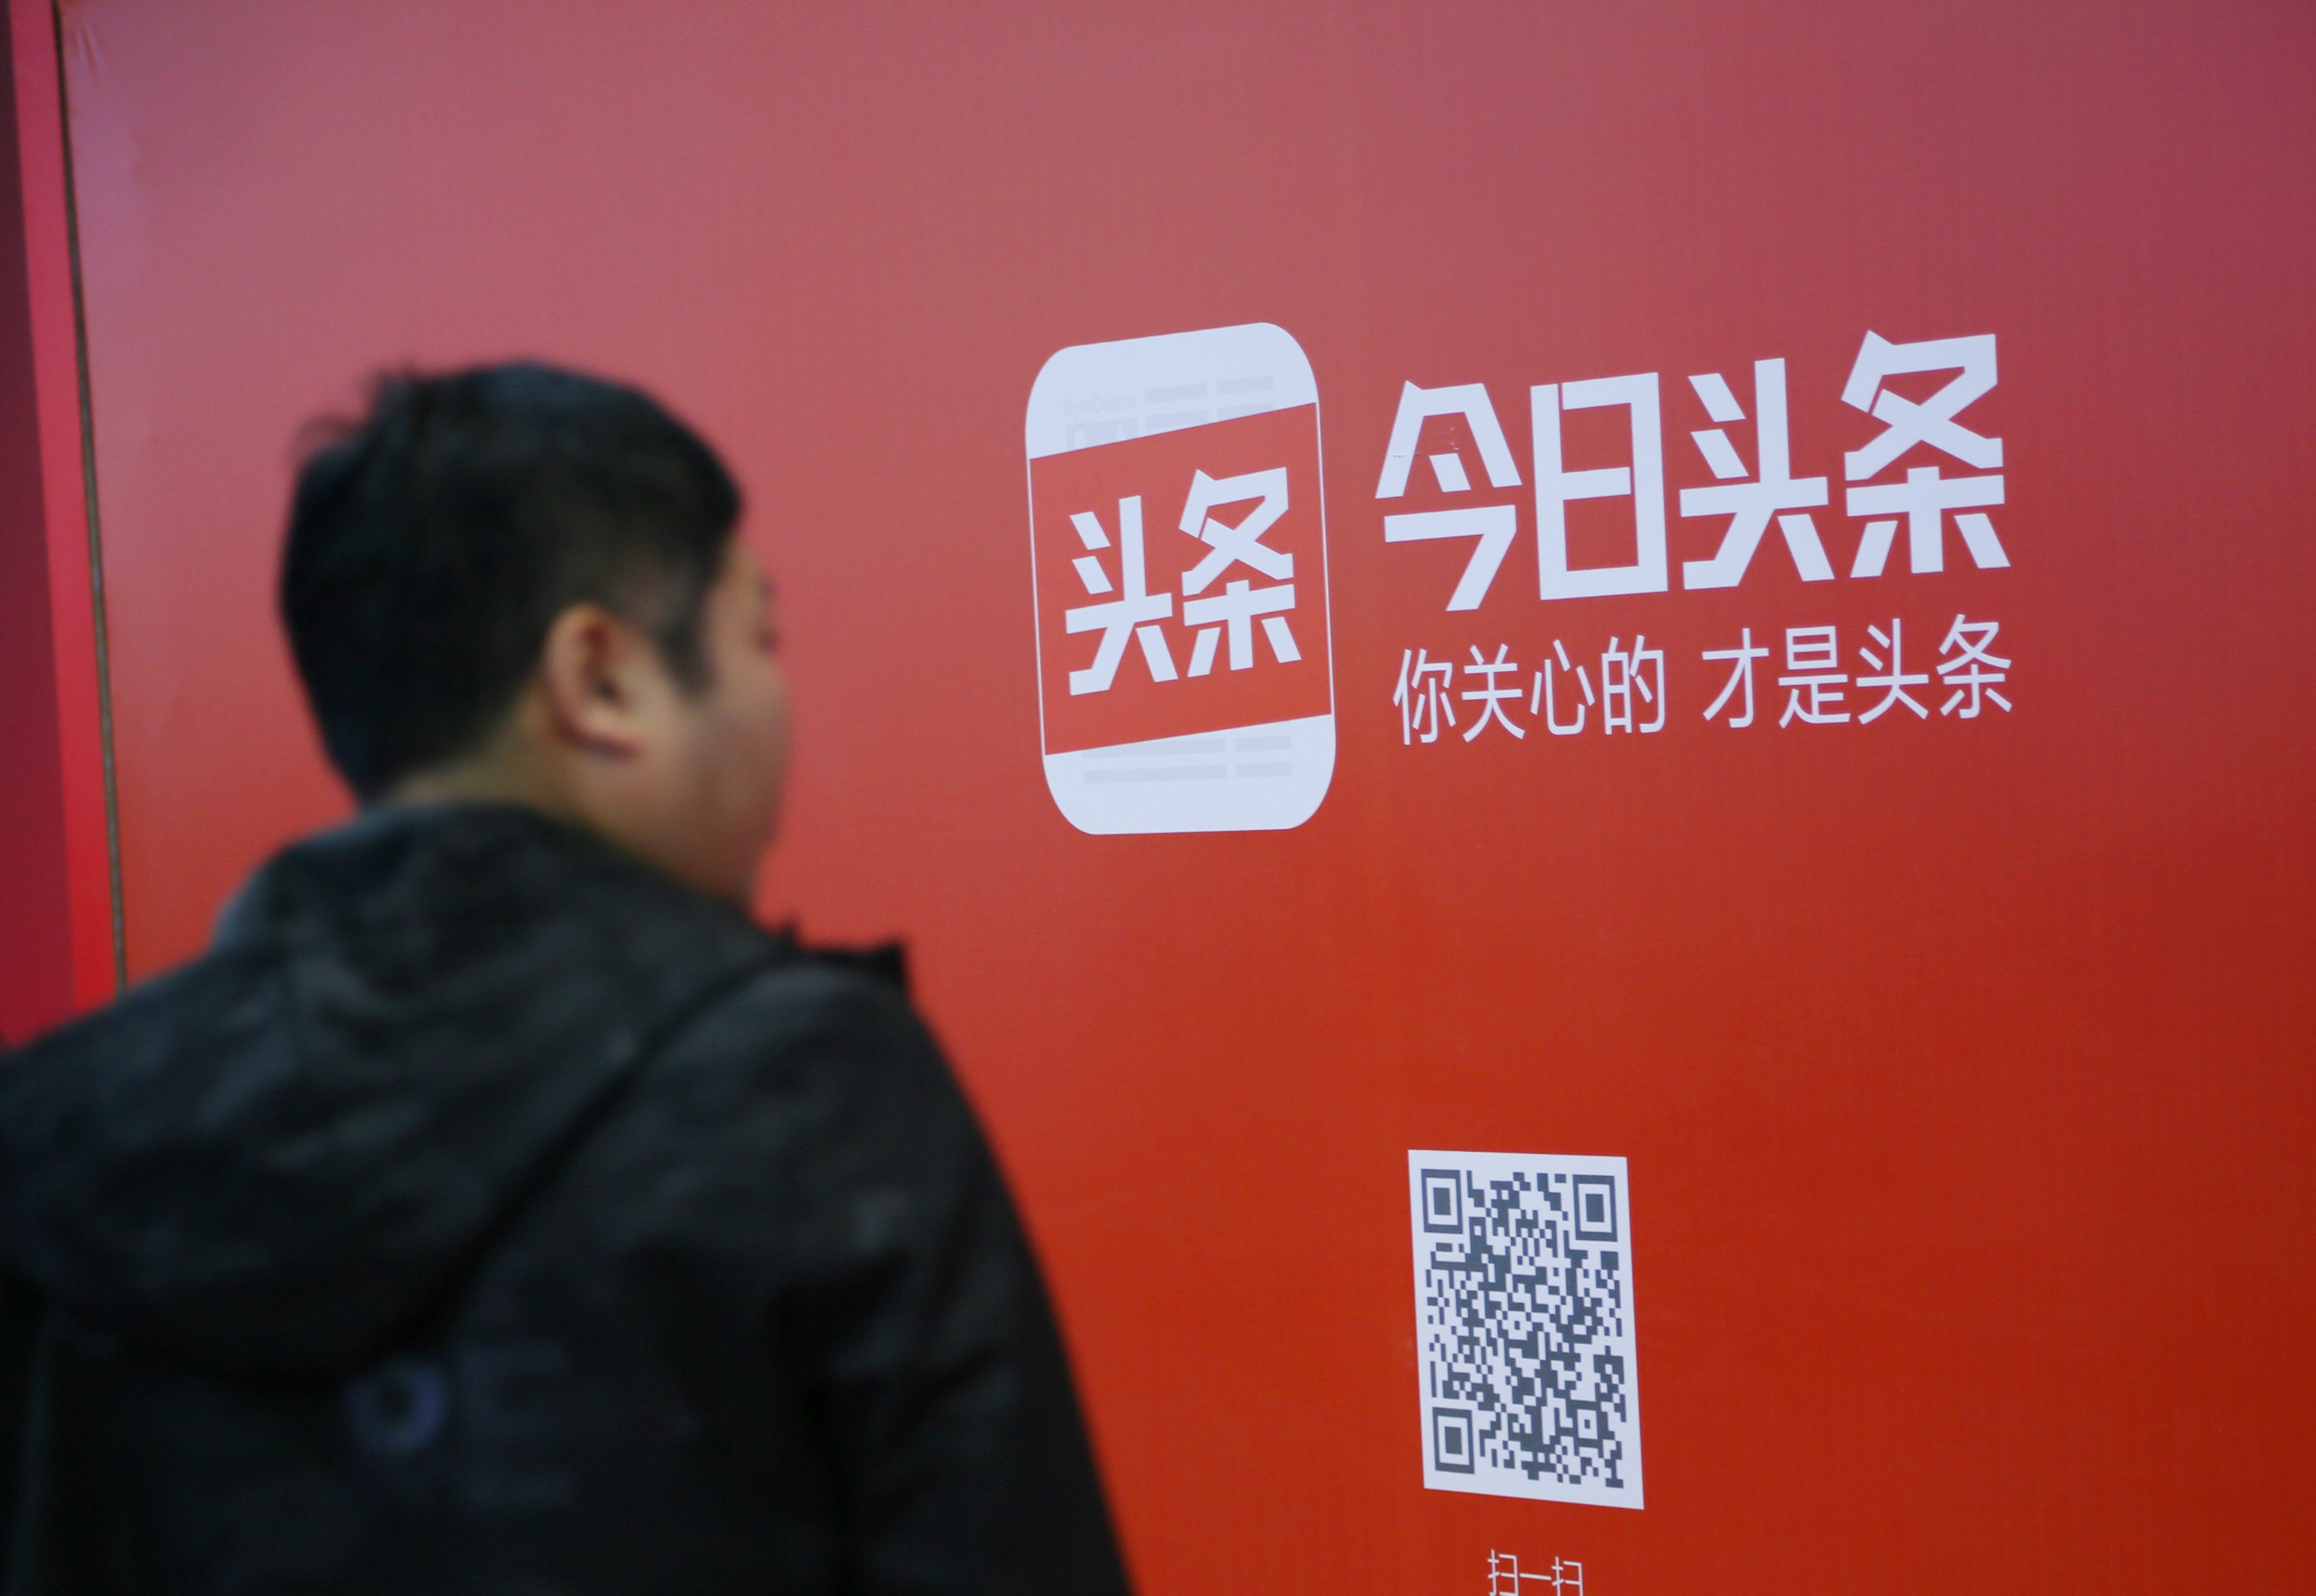 Jinri Toutiao, operated by Beijing ByteDance Technology, has apologised for publishing the online medical ads amid tighter government regulation on internet content